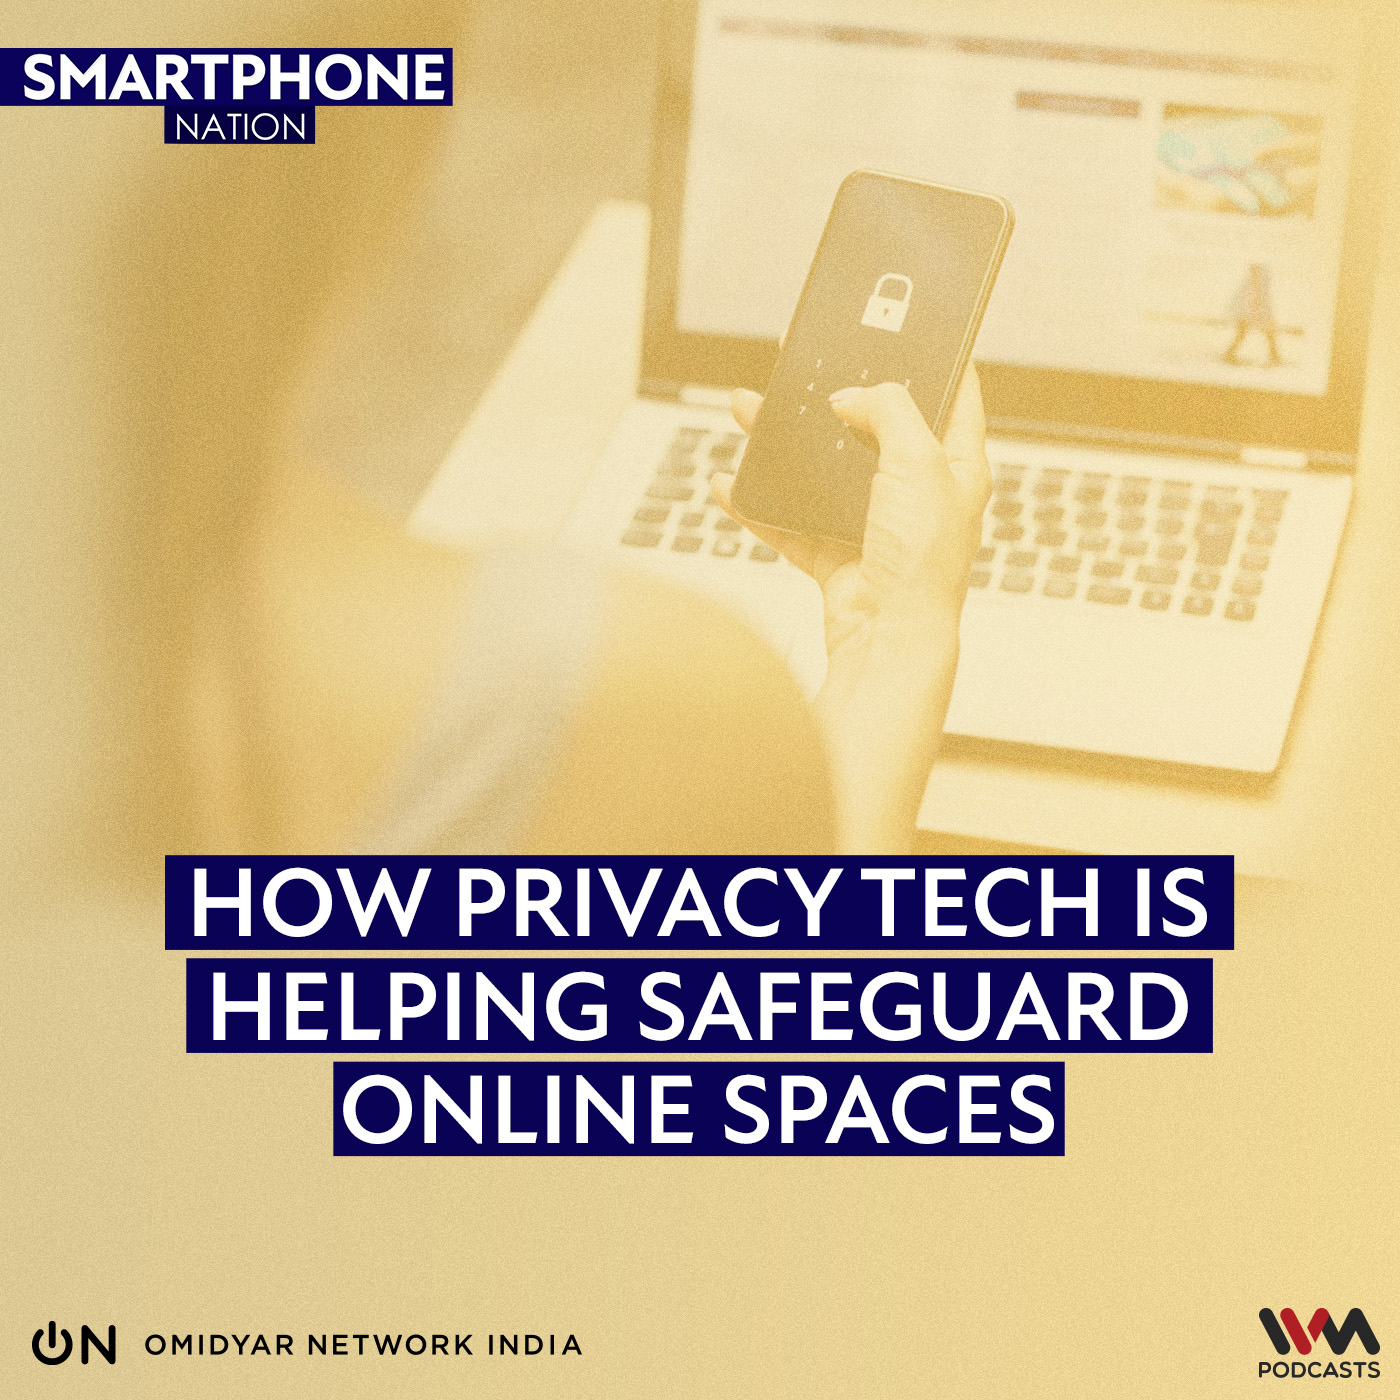 How Privacy Tech is Helping Safeguard Online Spaces